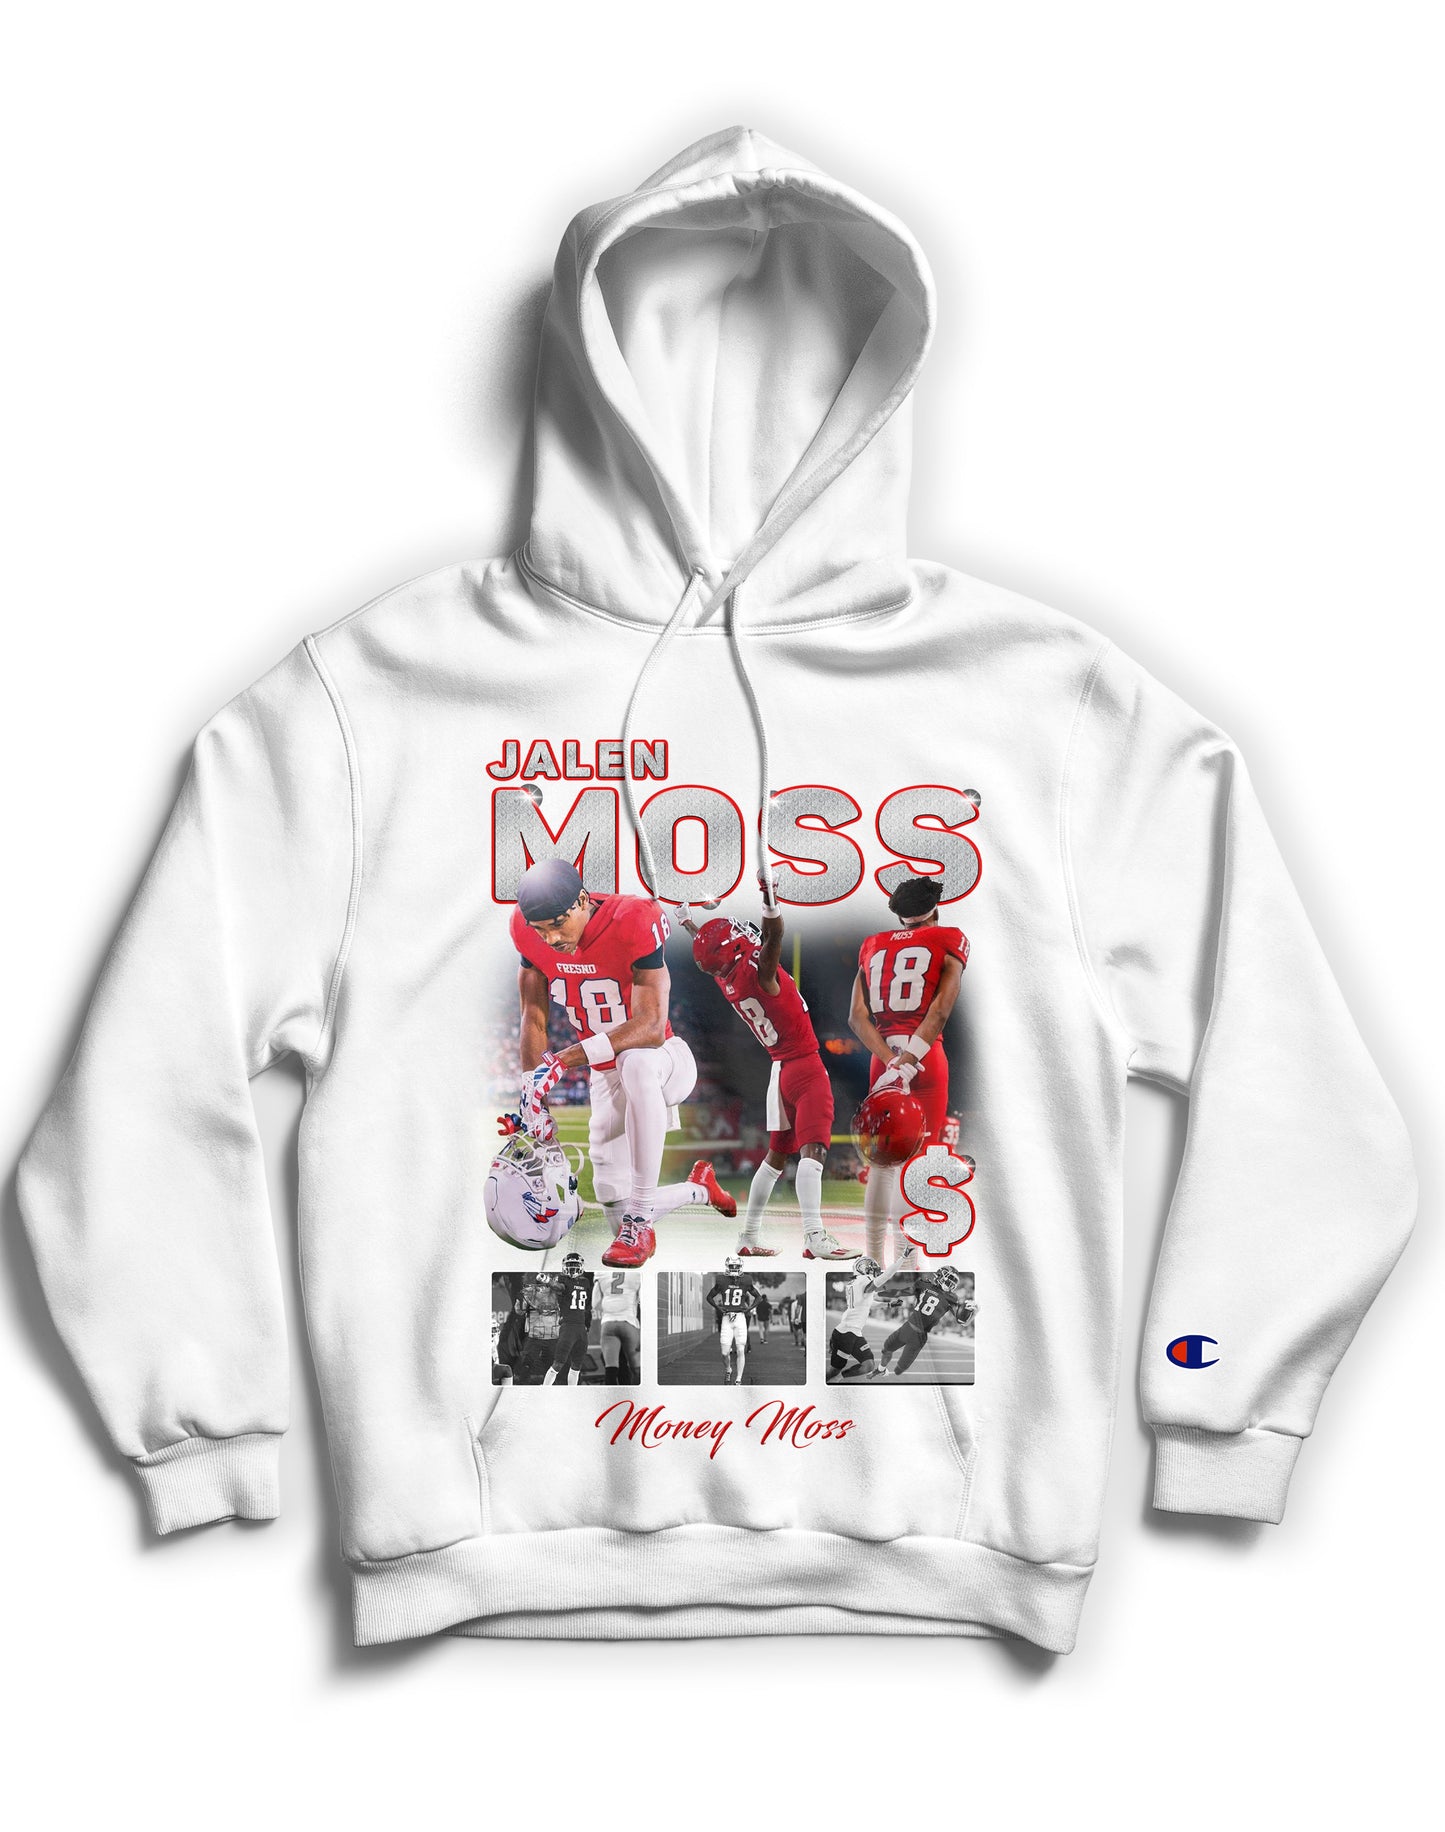 Jalen "Money" Moss Tribute Hoodie *LIMITED EDITION* (Black & White)